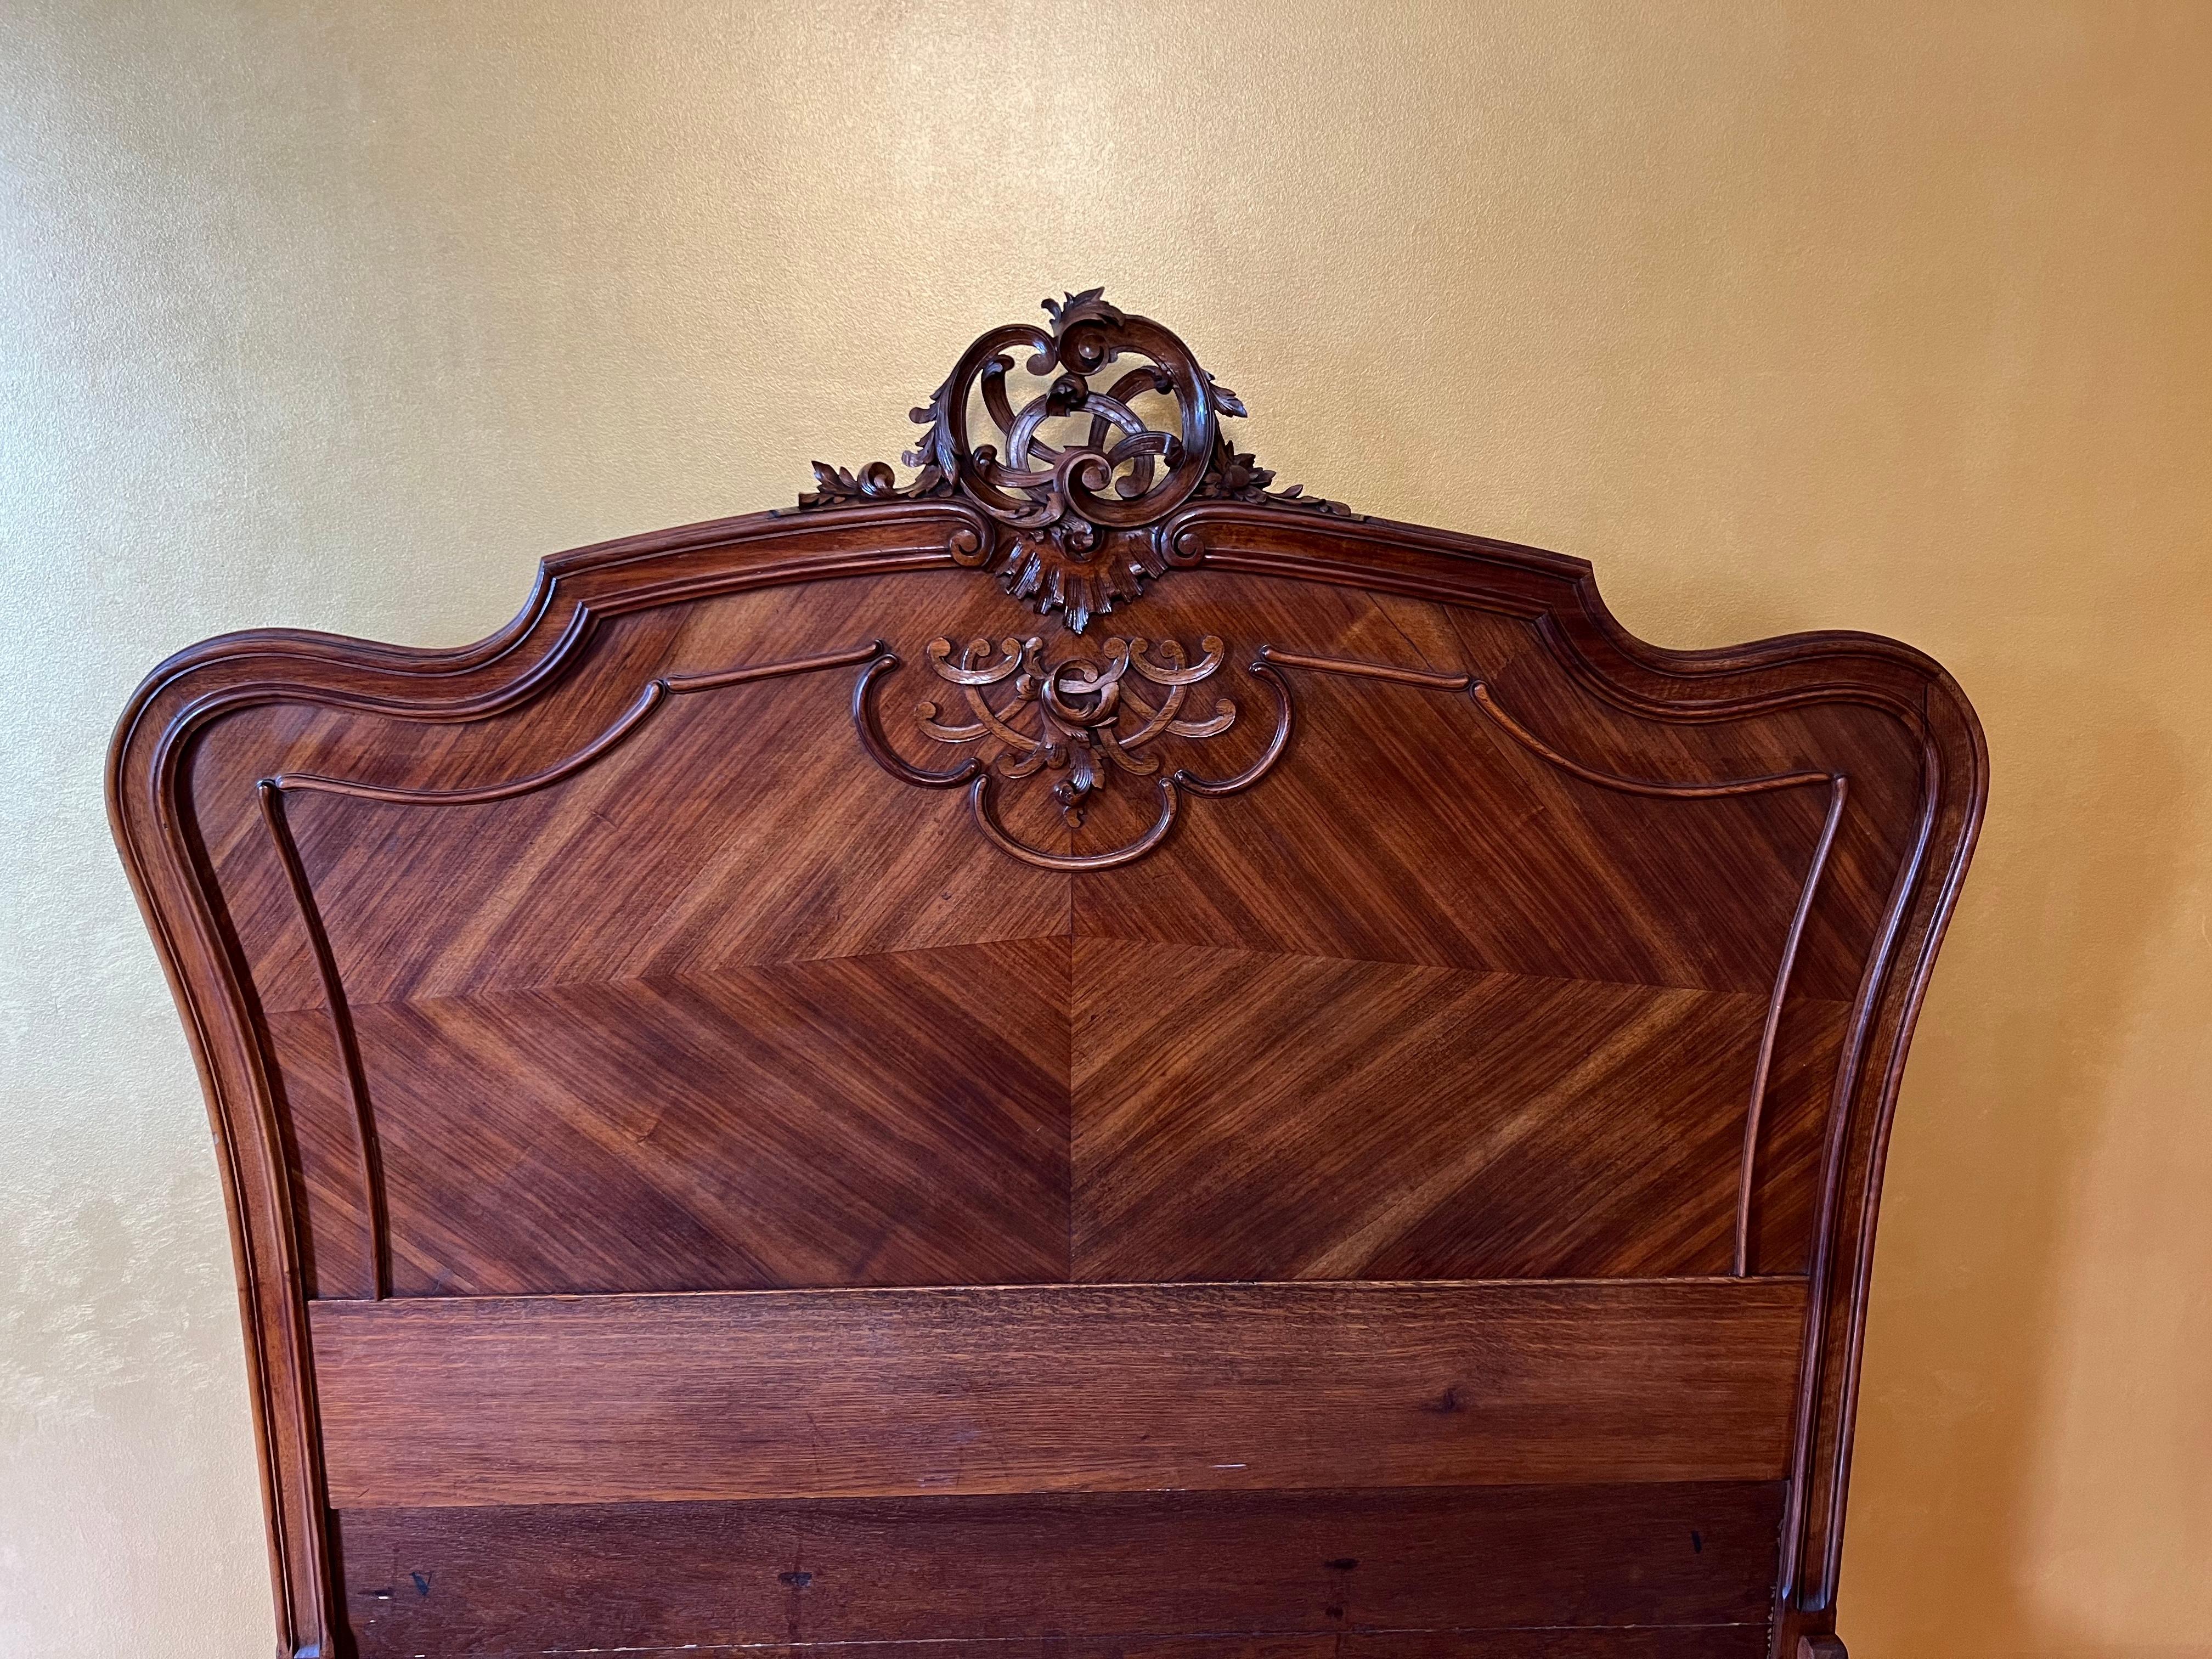 Spiral carving cutout detail to centre headboard, similar detailing to front headboard, turned shaped legs and carvings, checker design in wood on both front and back headboard, comes with slats. 

Size: Double Size

Circa: 19th